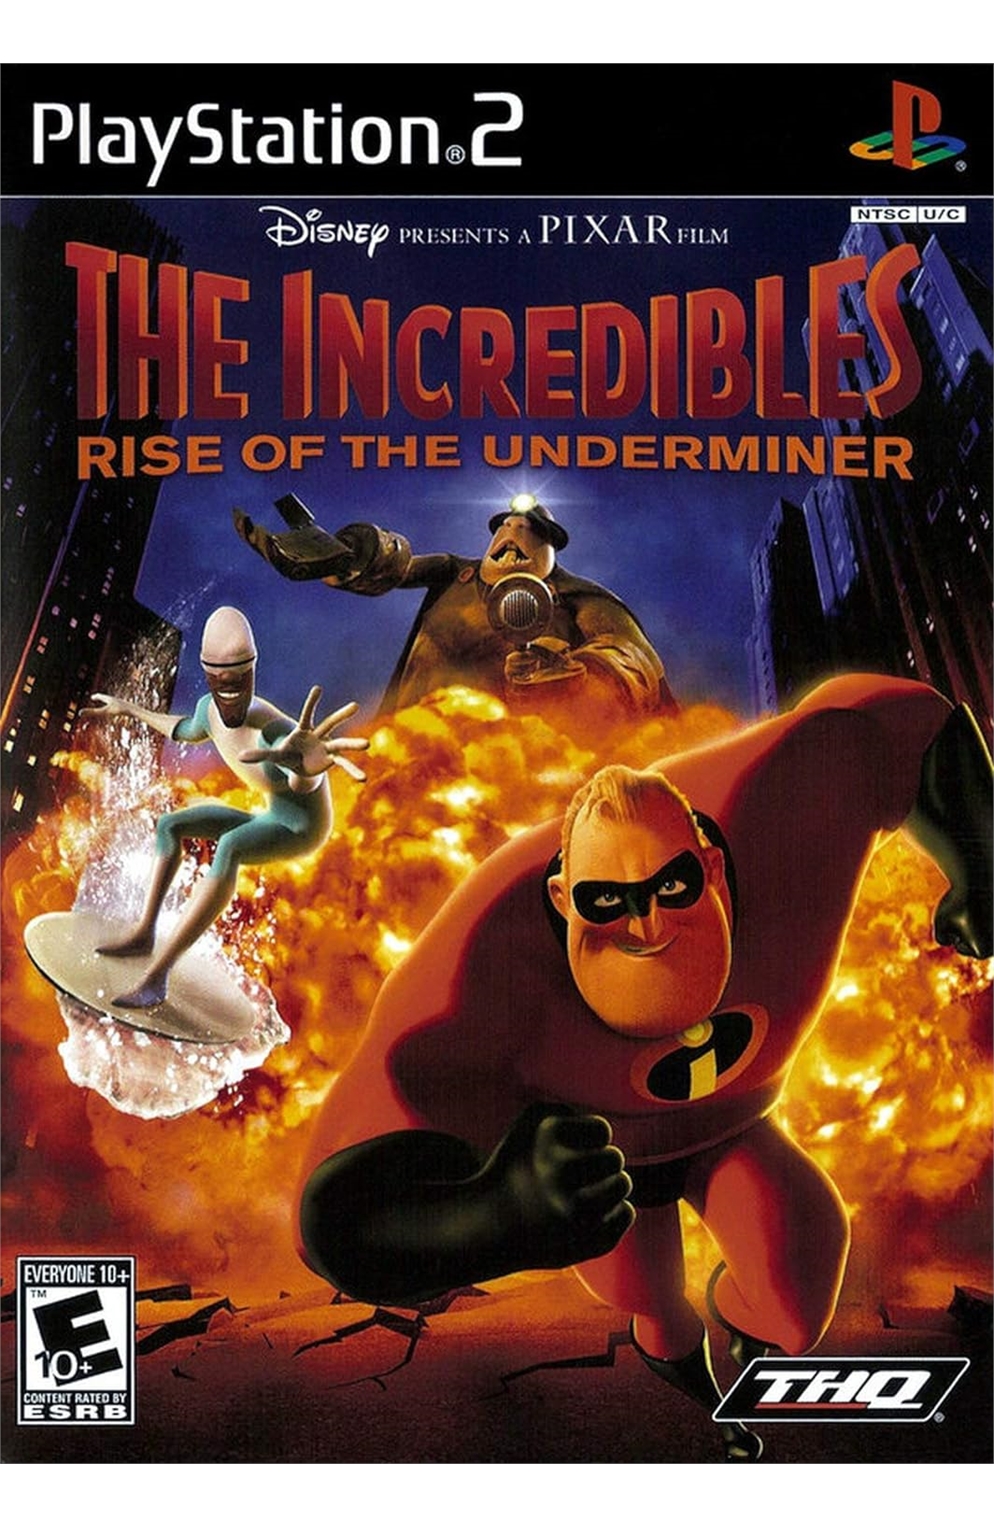 Playstation 2 Ps2 The Incredibles: Rise of The Underminer